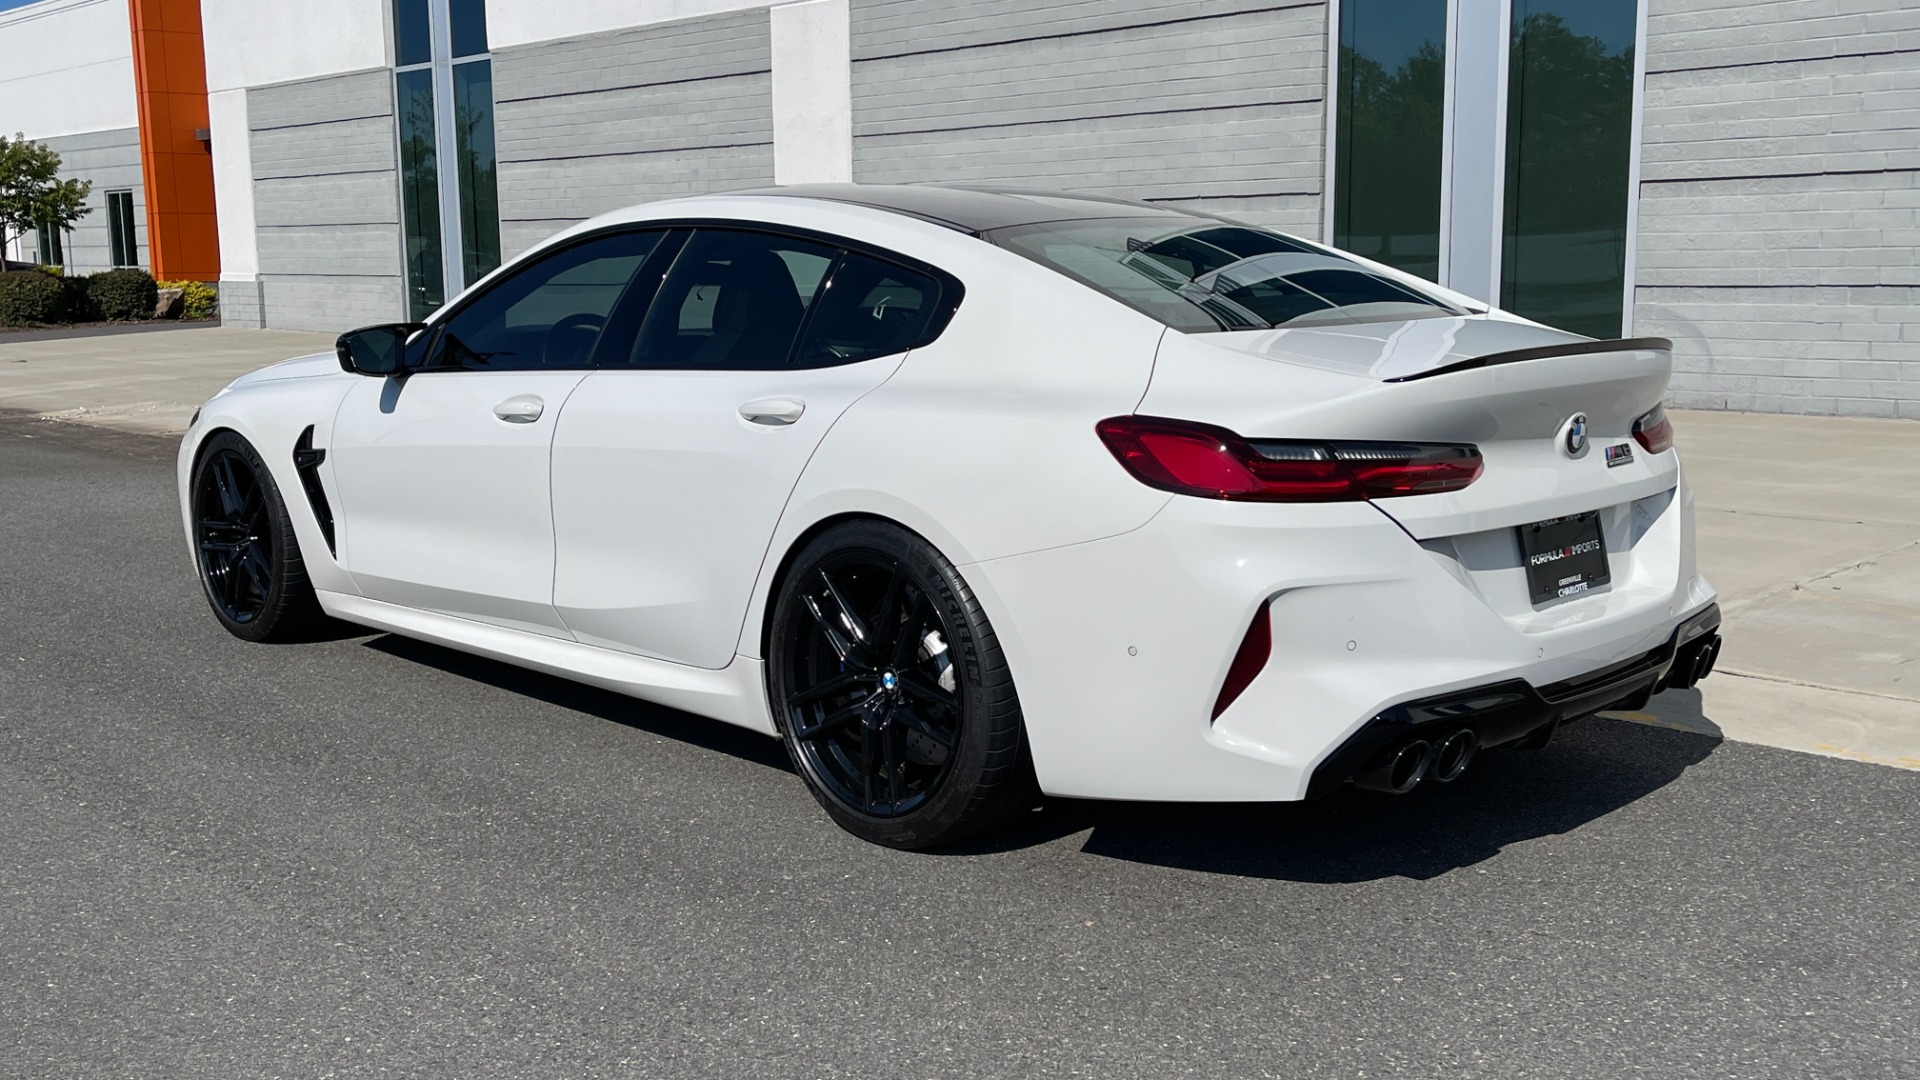 Used 2020 BMW M8 COMPETITON / TWIN TURBO / KW V3 SUSPENSION / FRONT LIFT / PPF / CERAMIC COA for sale Sold at Formula Imports in Charlotte NC 28227 8